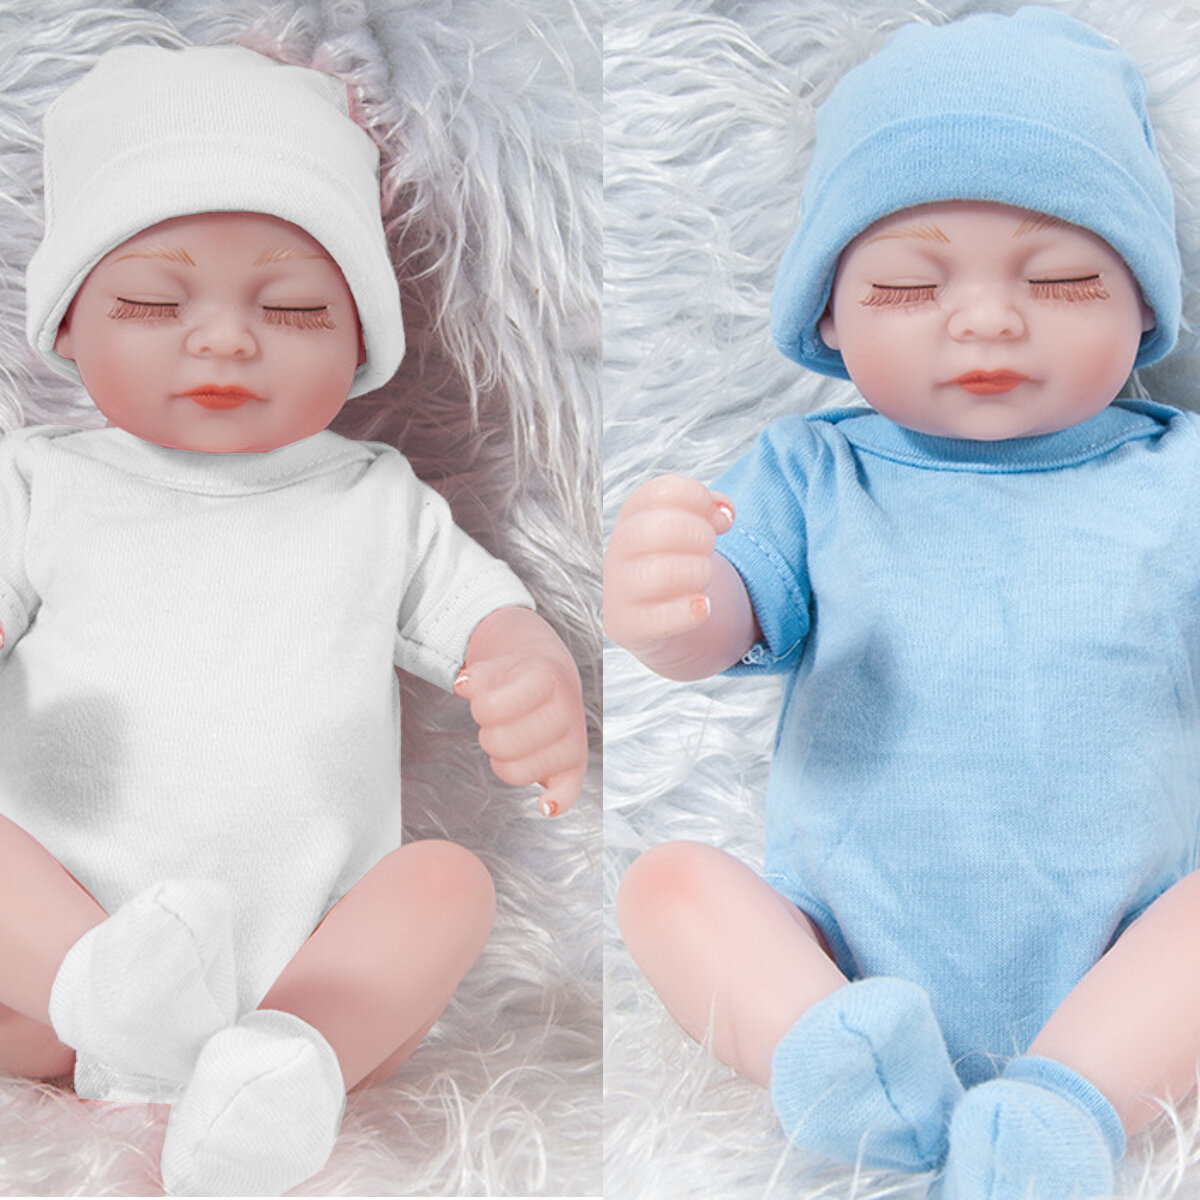 28CM Soft Silicone Realistic Sleeping Reborns Lifelikes Newborns Baby Doll Toy with Moveable Head Arms And Legs